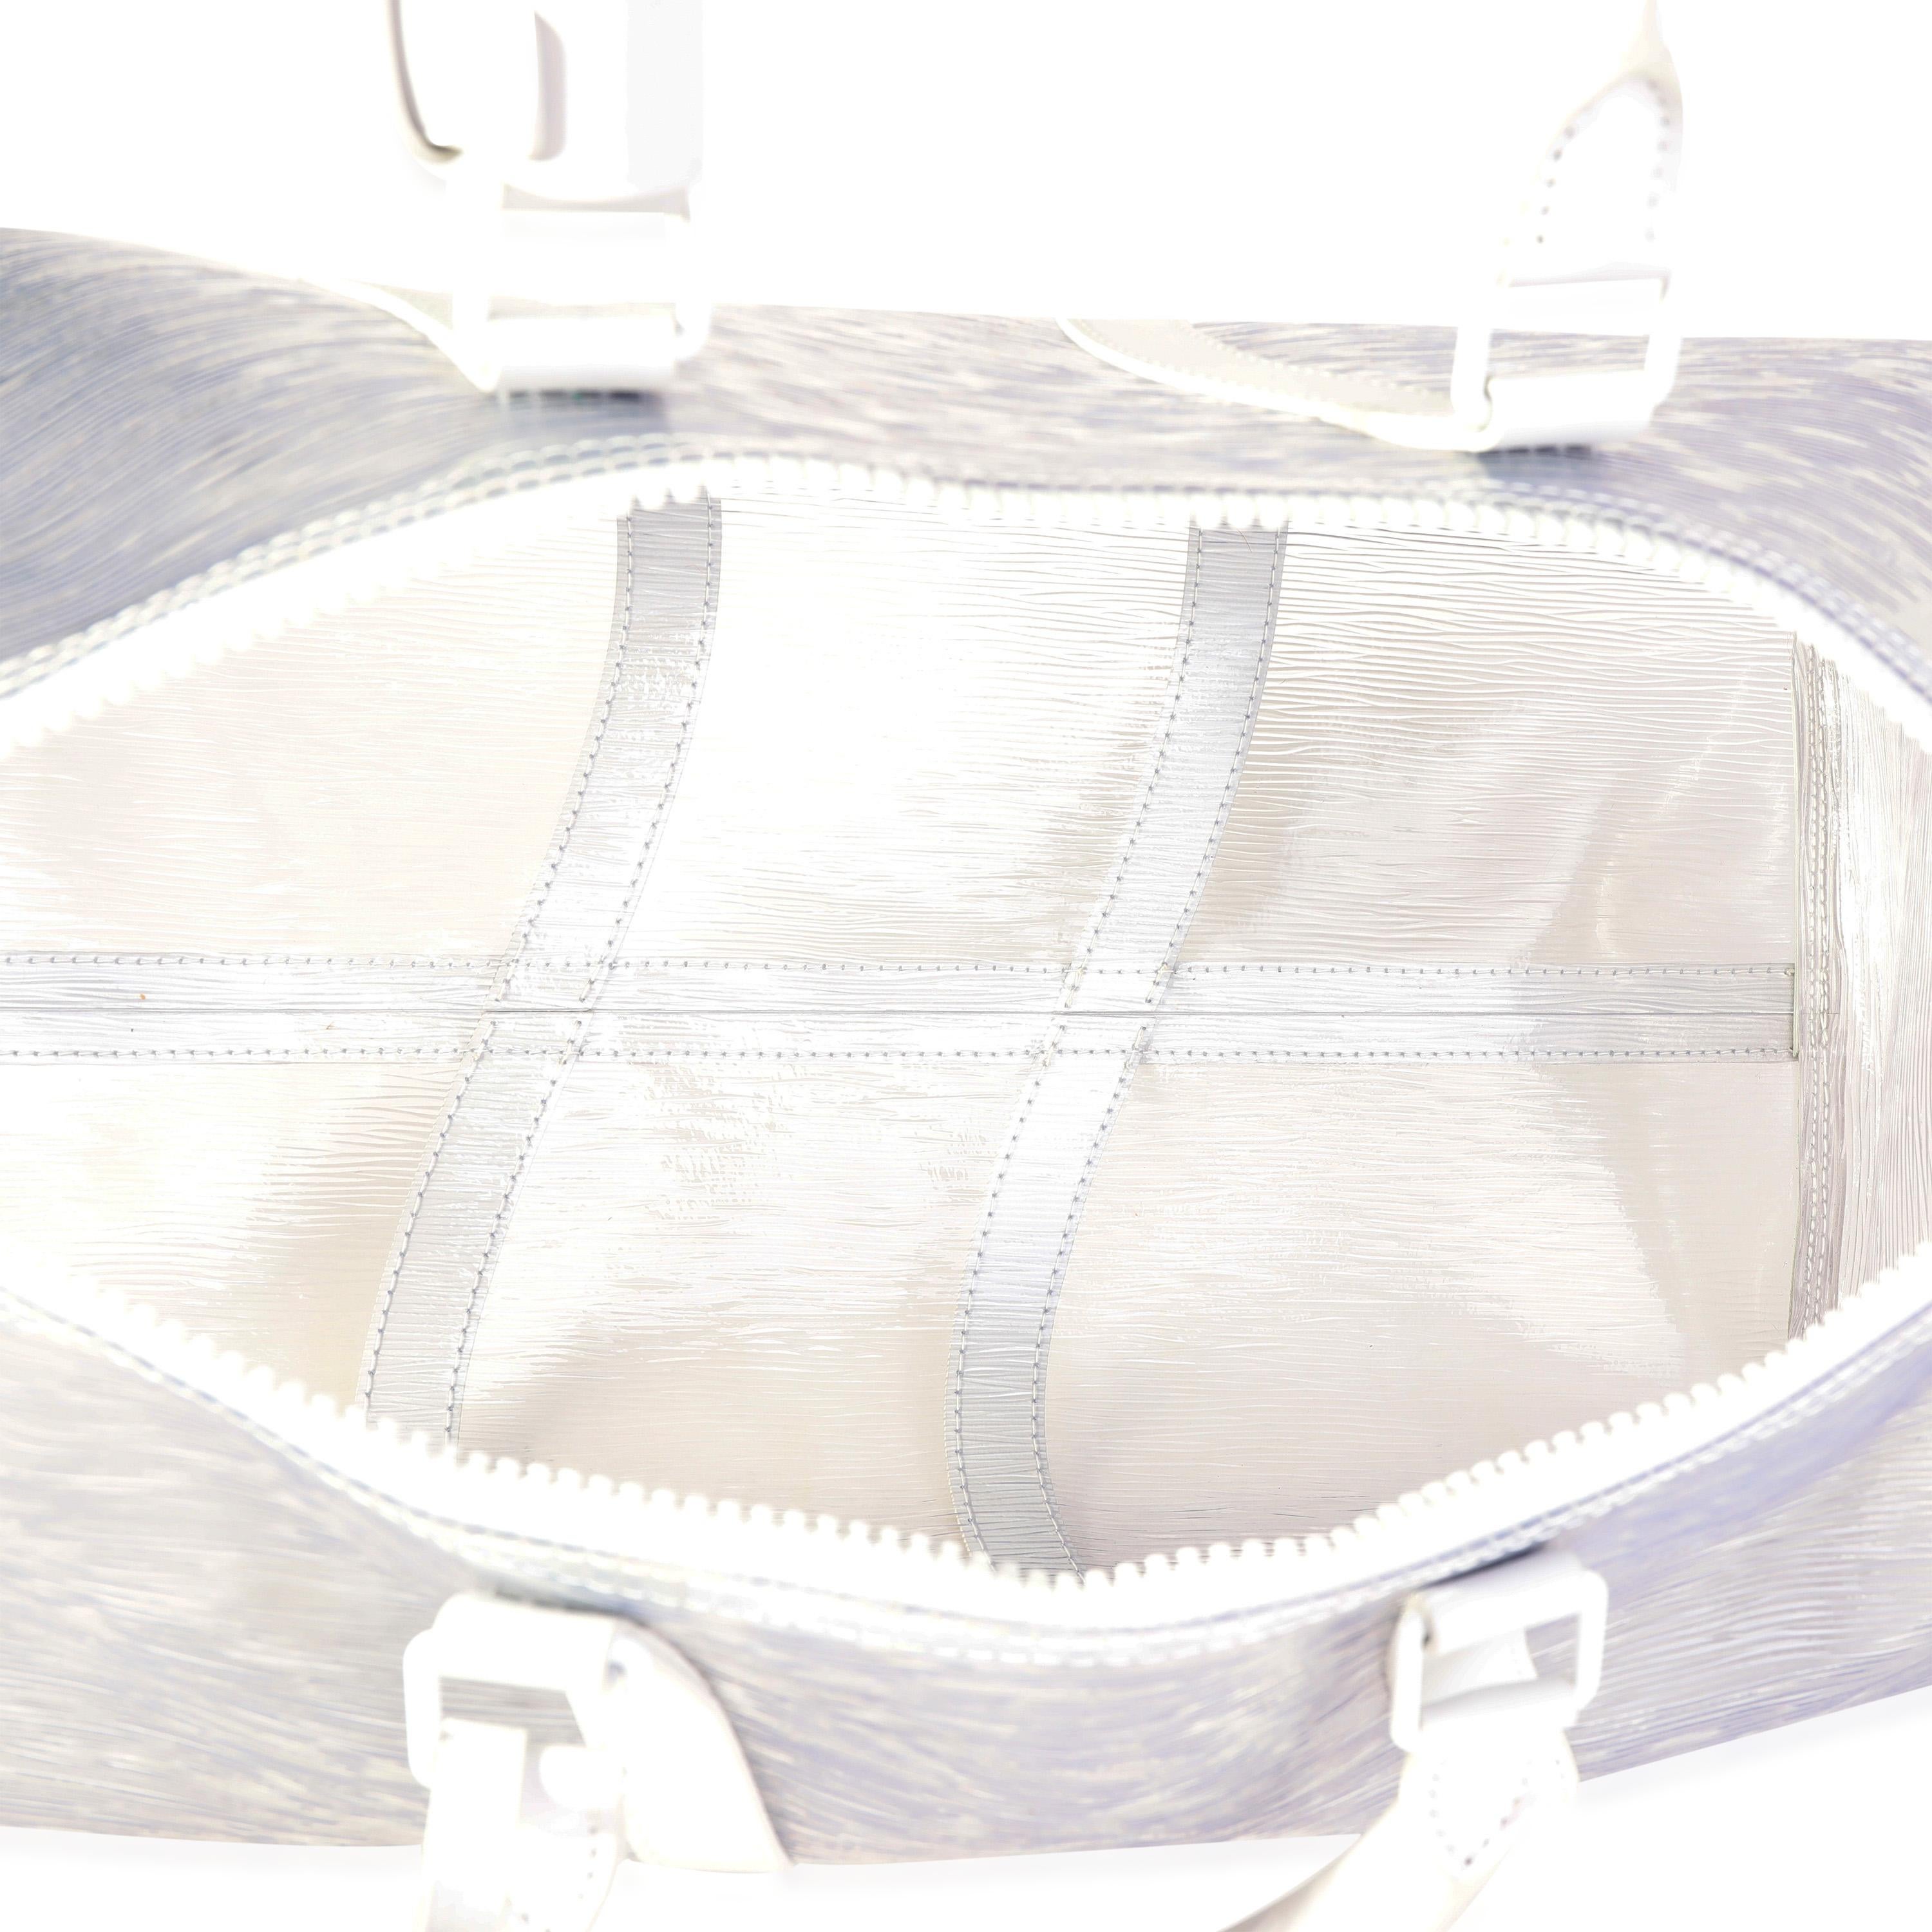 Listing Title: Louis Vuitton Clear Epi PVC Wavy Keepall Bandoulière 50
SKU: 119585
MSRP: 4150.00
Condition: Pre-owned (3000)
Handbag Condition: Never Worn
Condition Comments: Minor signs of use. Missing shoulder strap.
Brand: Louis Vuitton
Model: